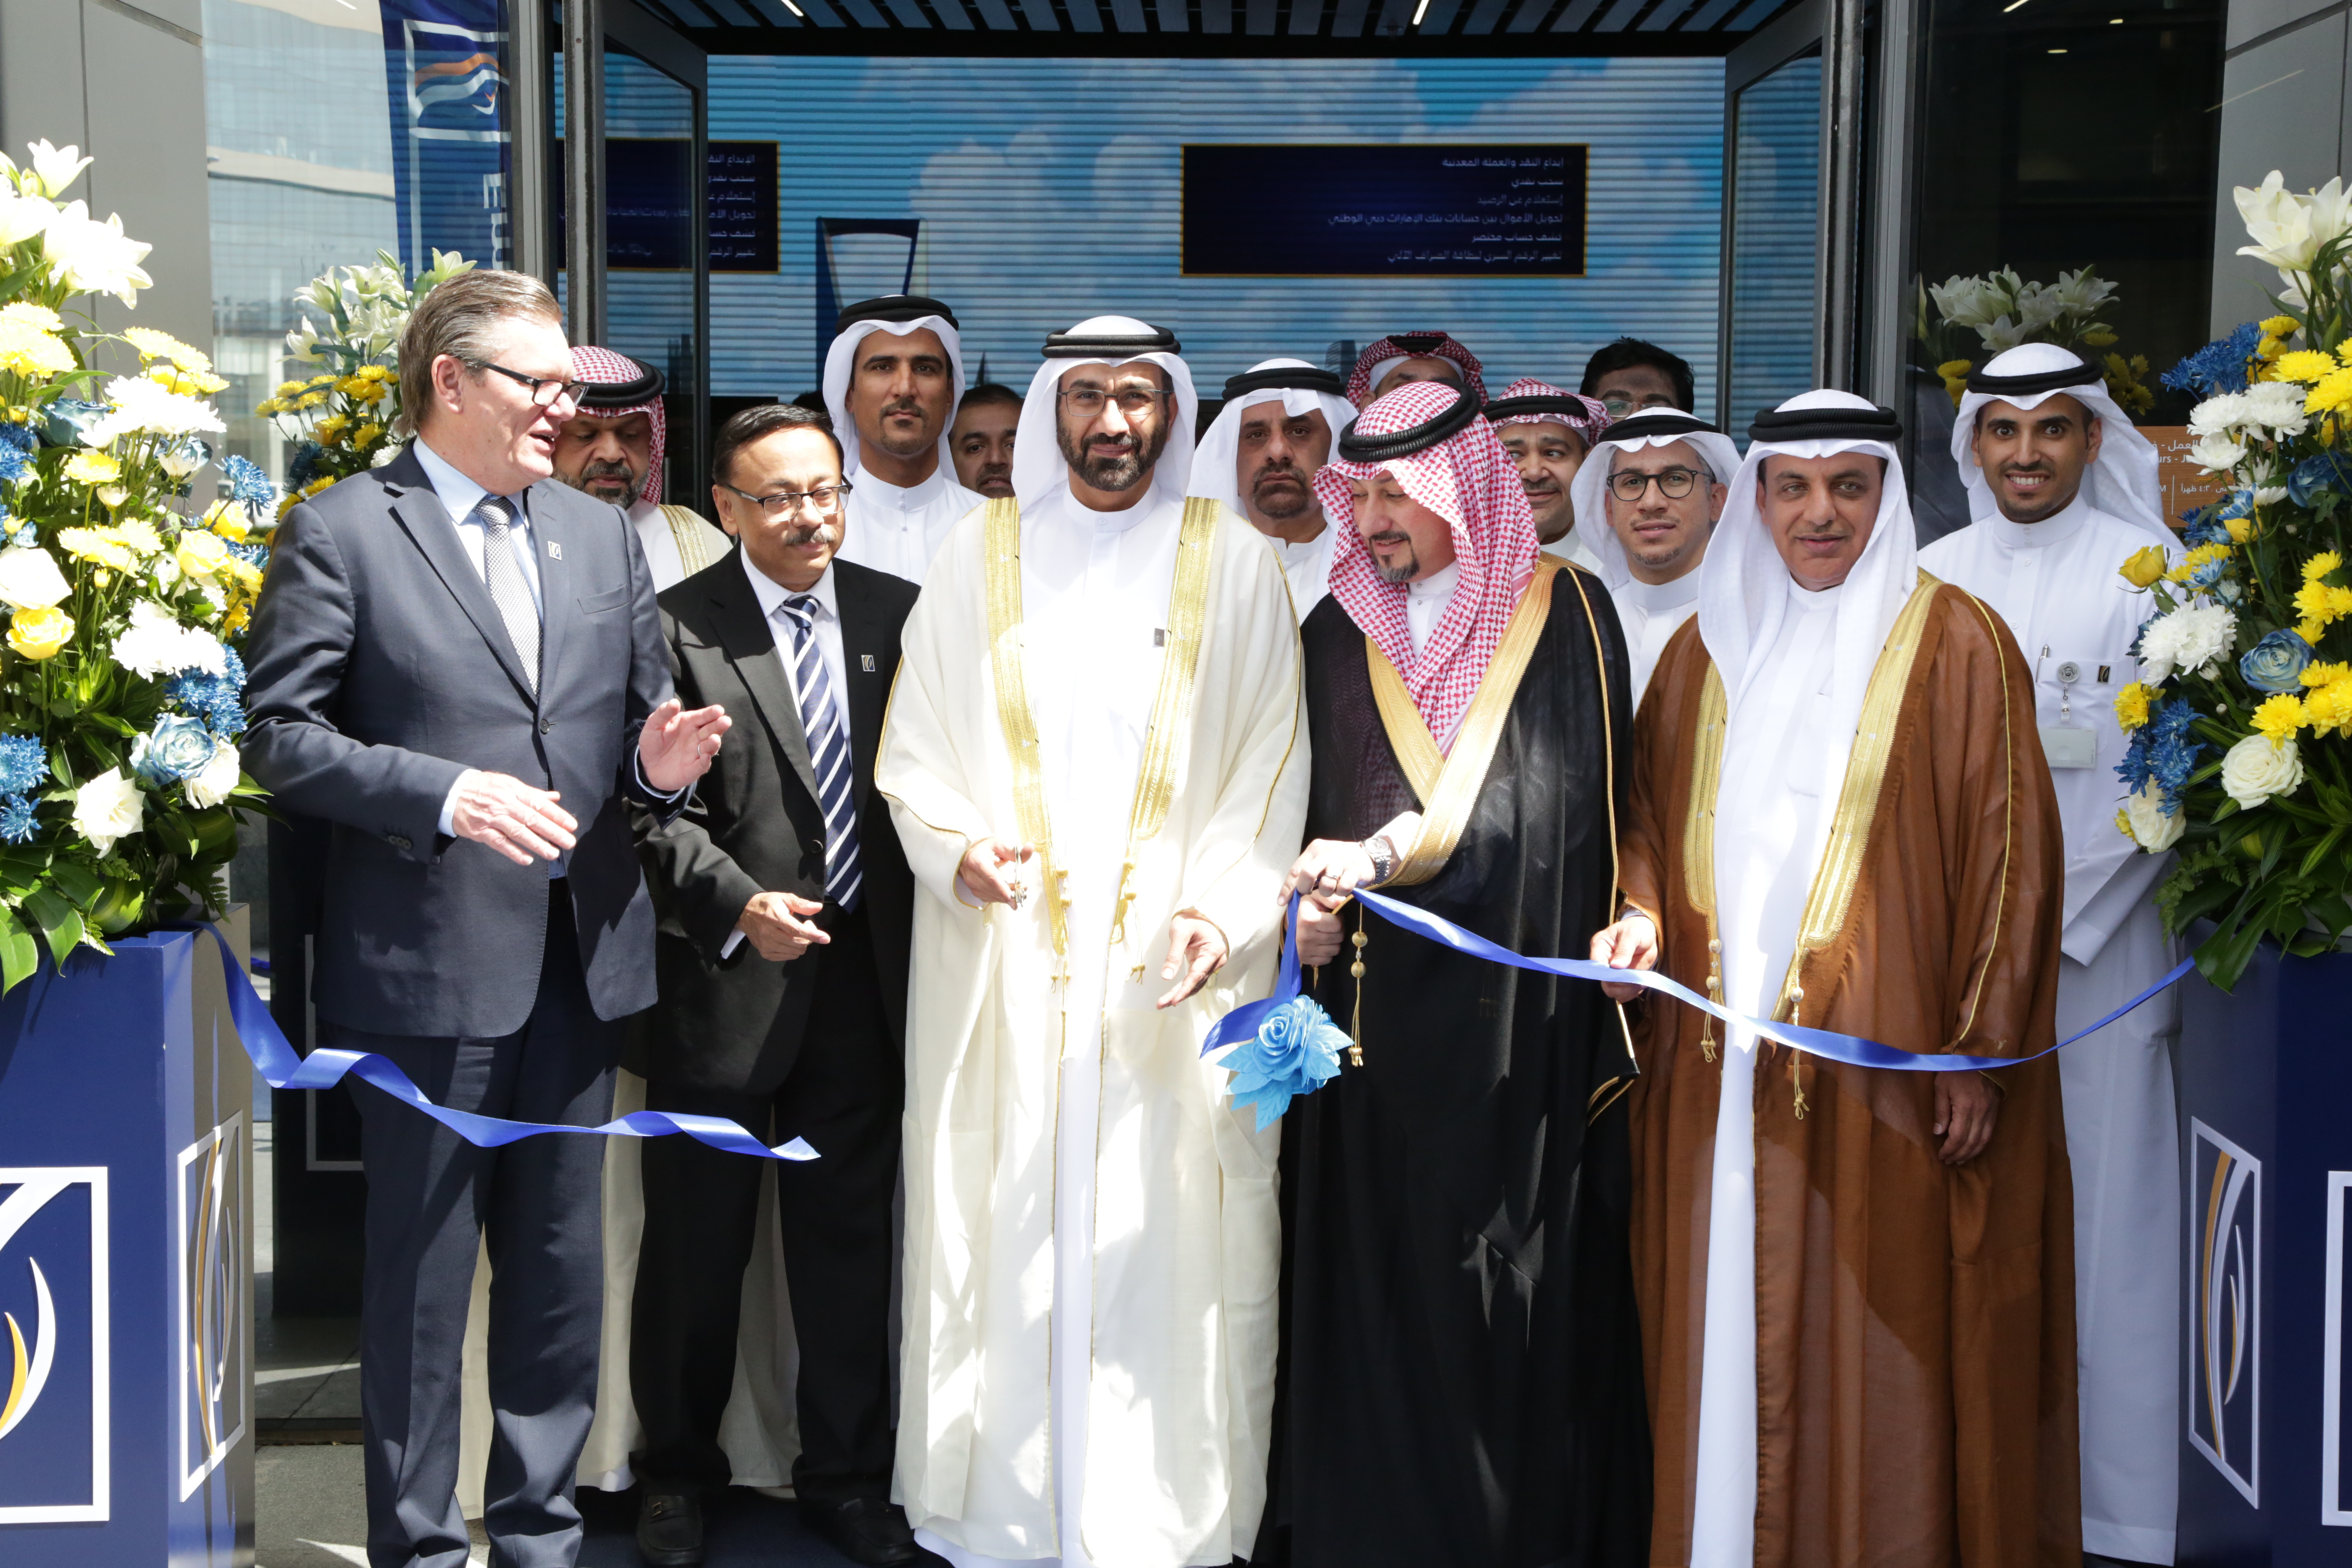 Covering the Opening of Emirates NBD branch in Jeddah